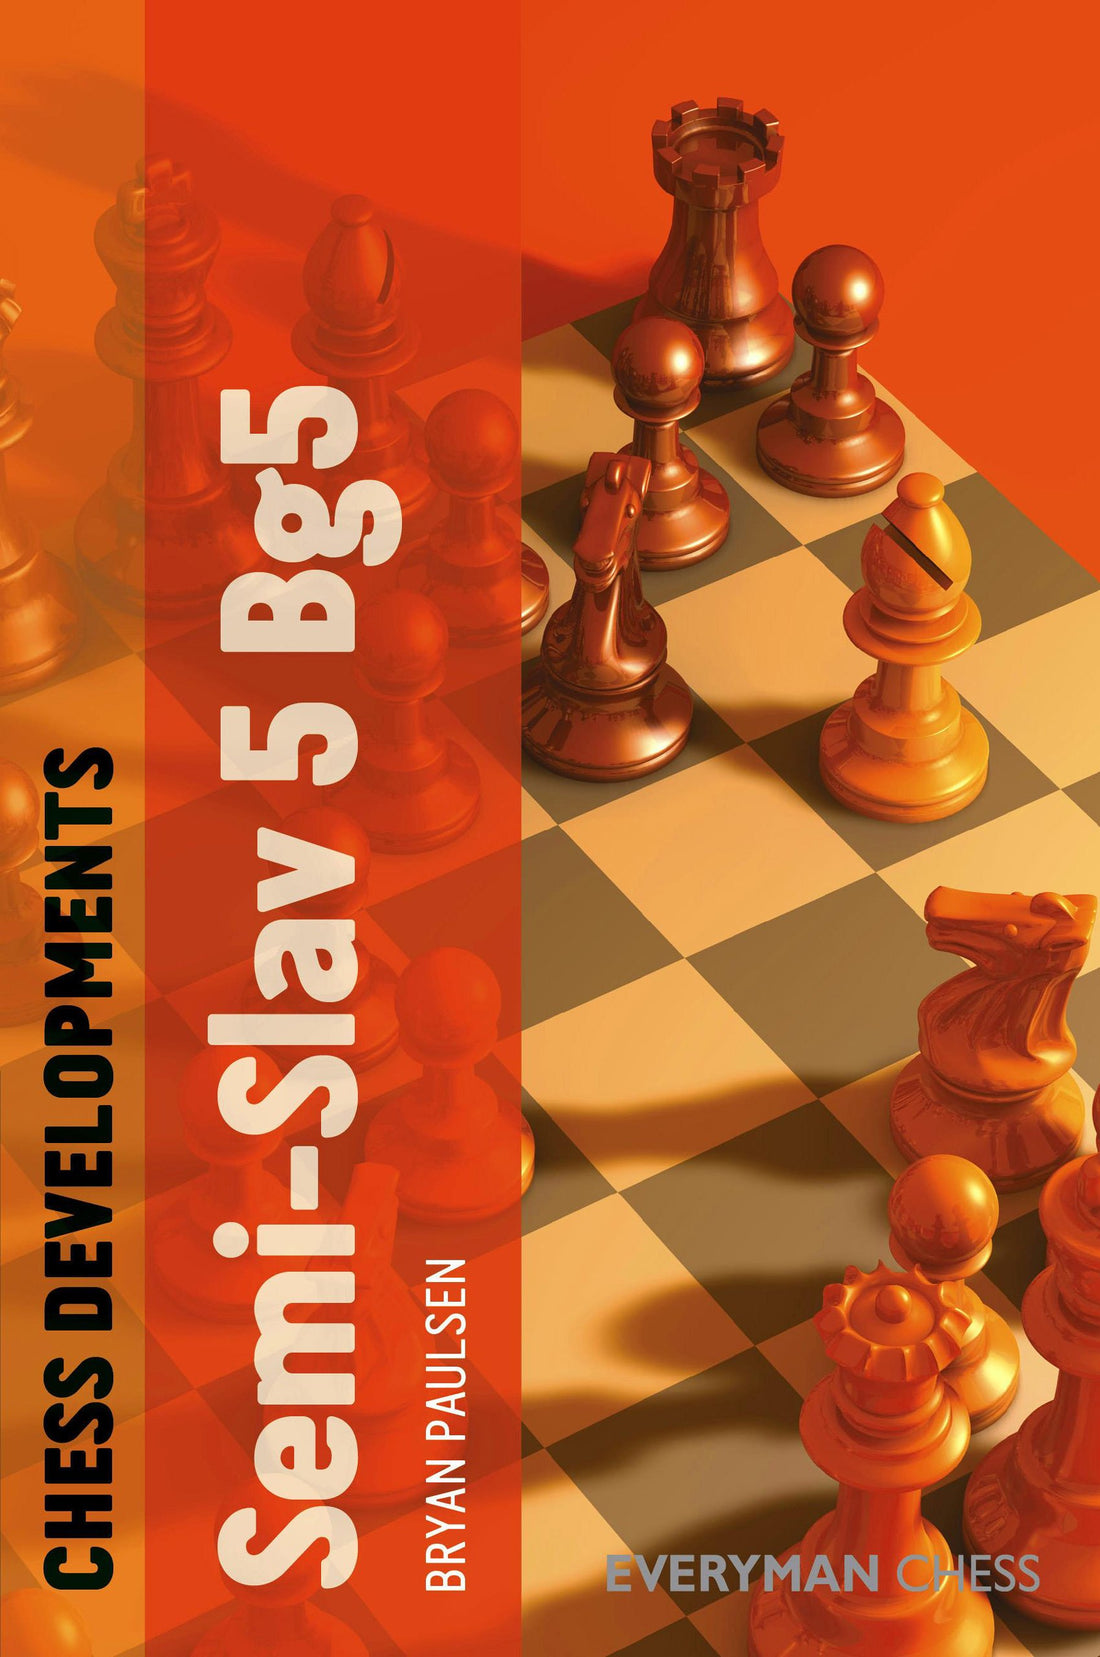 The Best Chess Openings Book for Anyone Under 1800 - Best Chess Book for  Beginners and Intermediate 